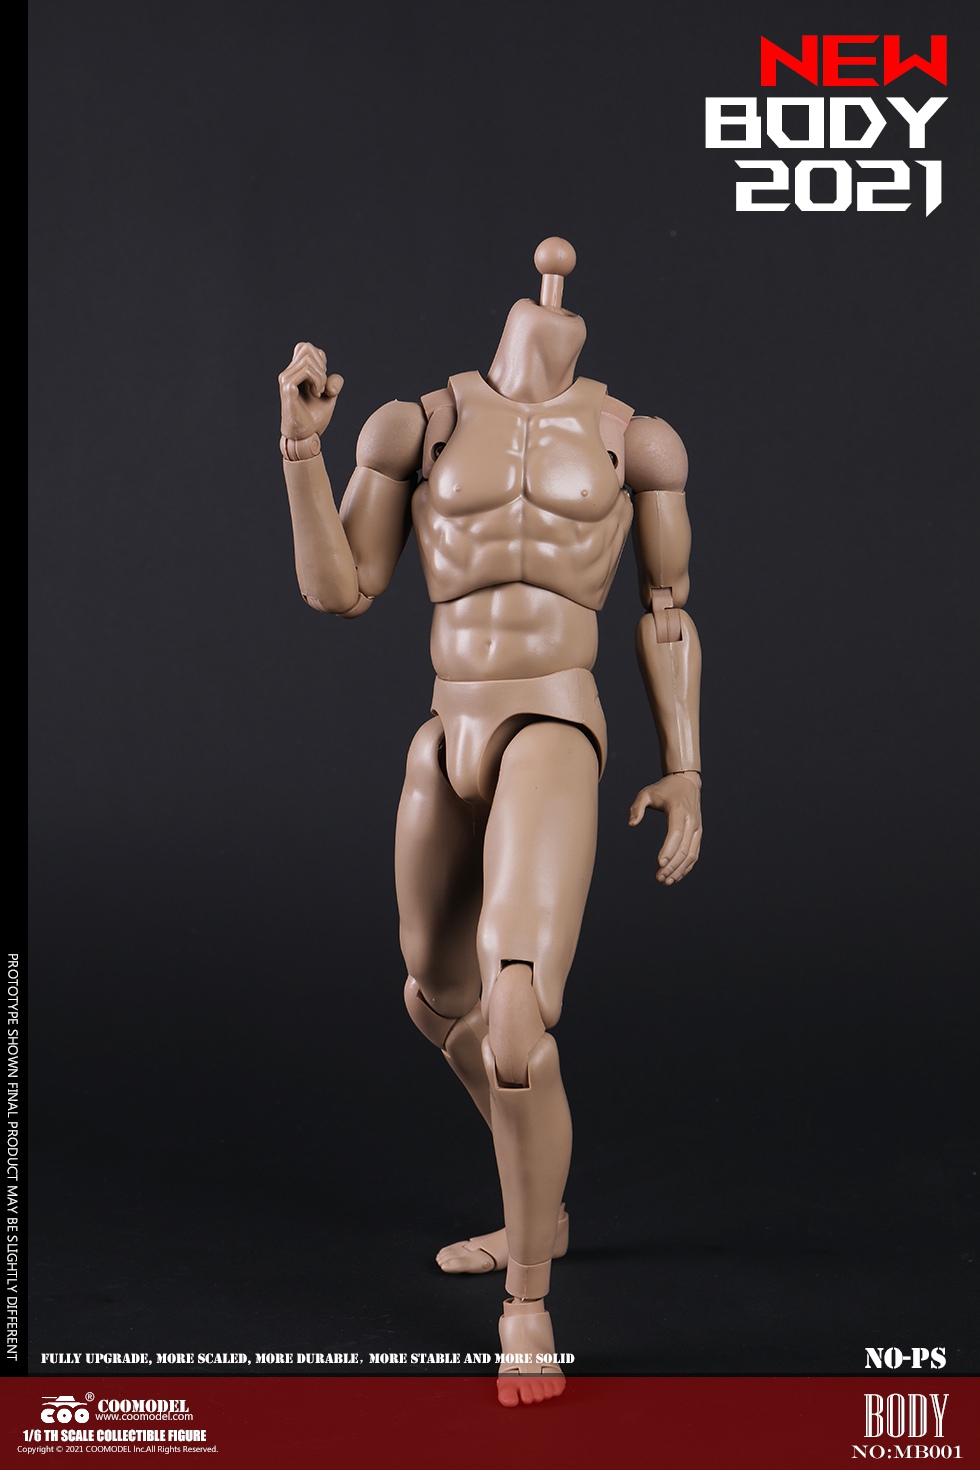 accessory - NEW PRODUCT: COOMODEL: 1/6 MB001 standard male body, MB002 tall male body, MB003 muscle male body, MB004 tall muscle body 18090311